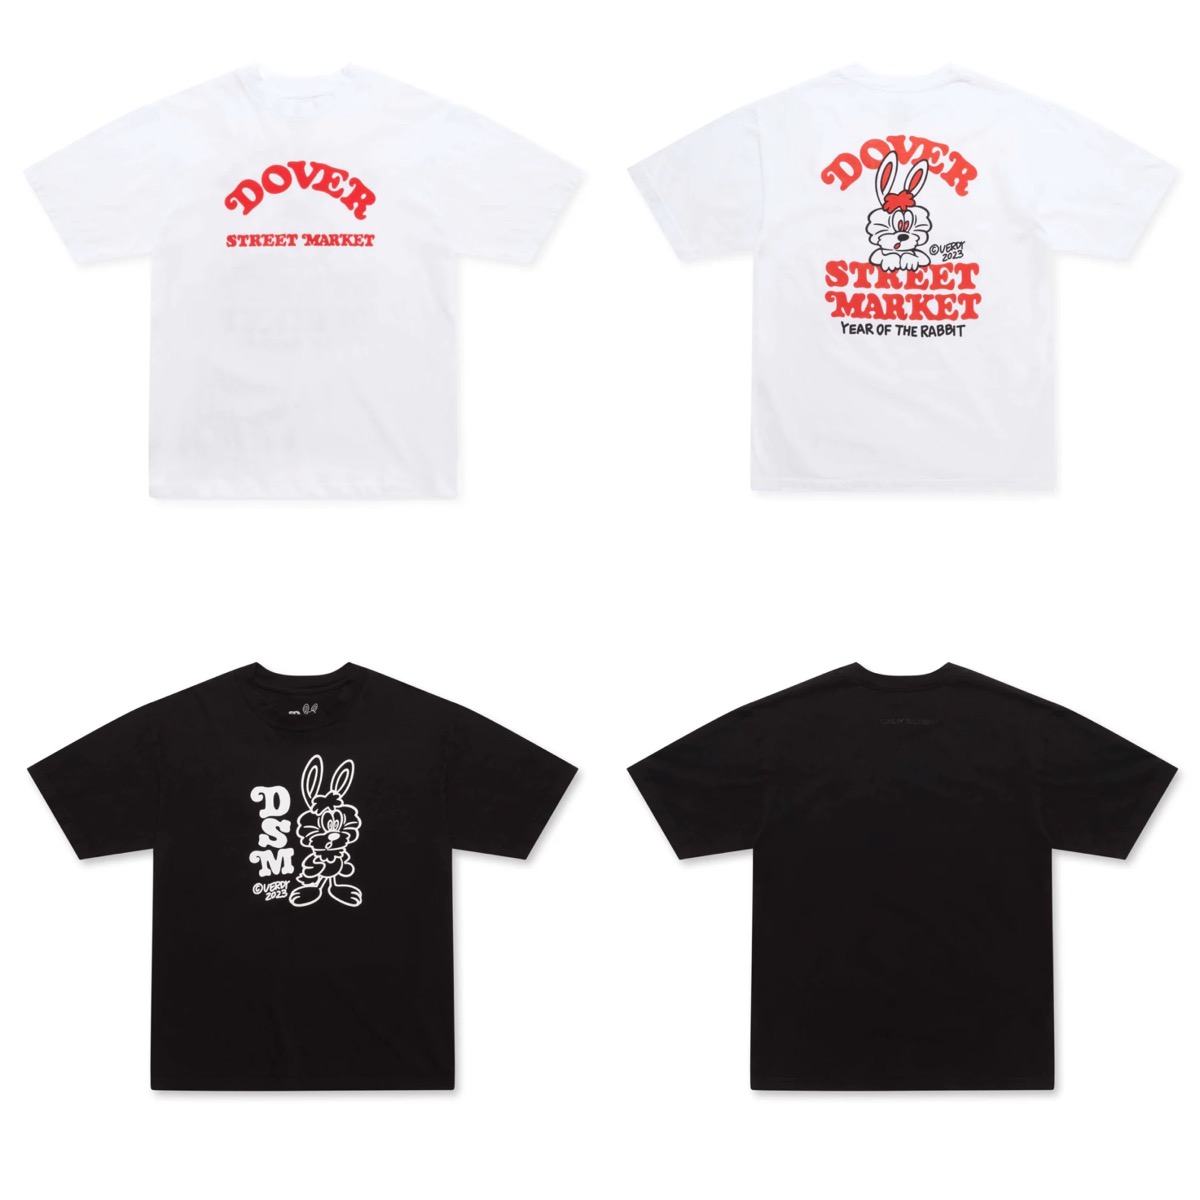 Dover Street Market × VERDY “Year of The Rabbit” Tシャツが国内1月 